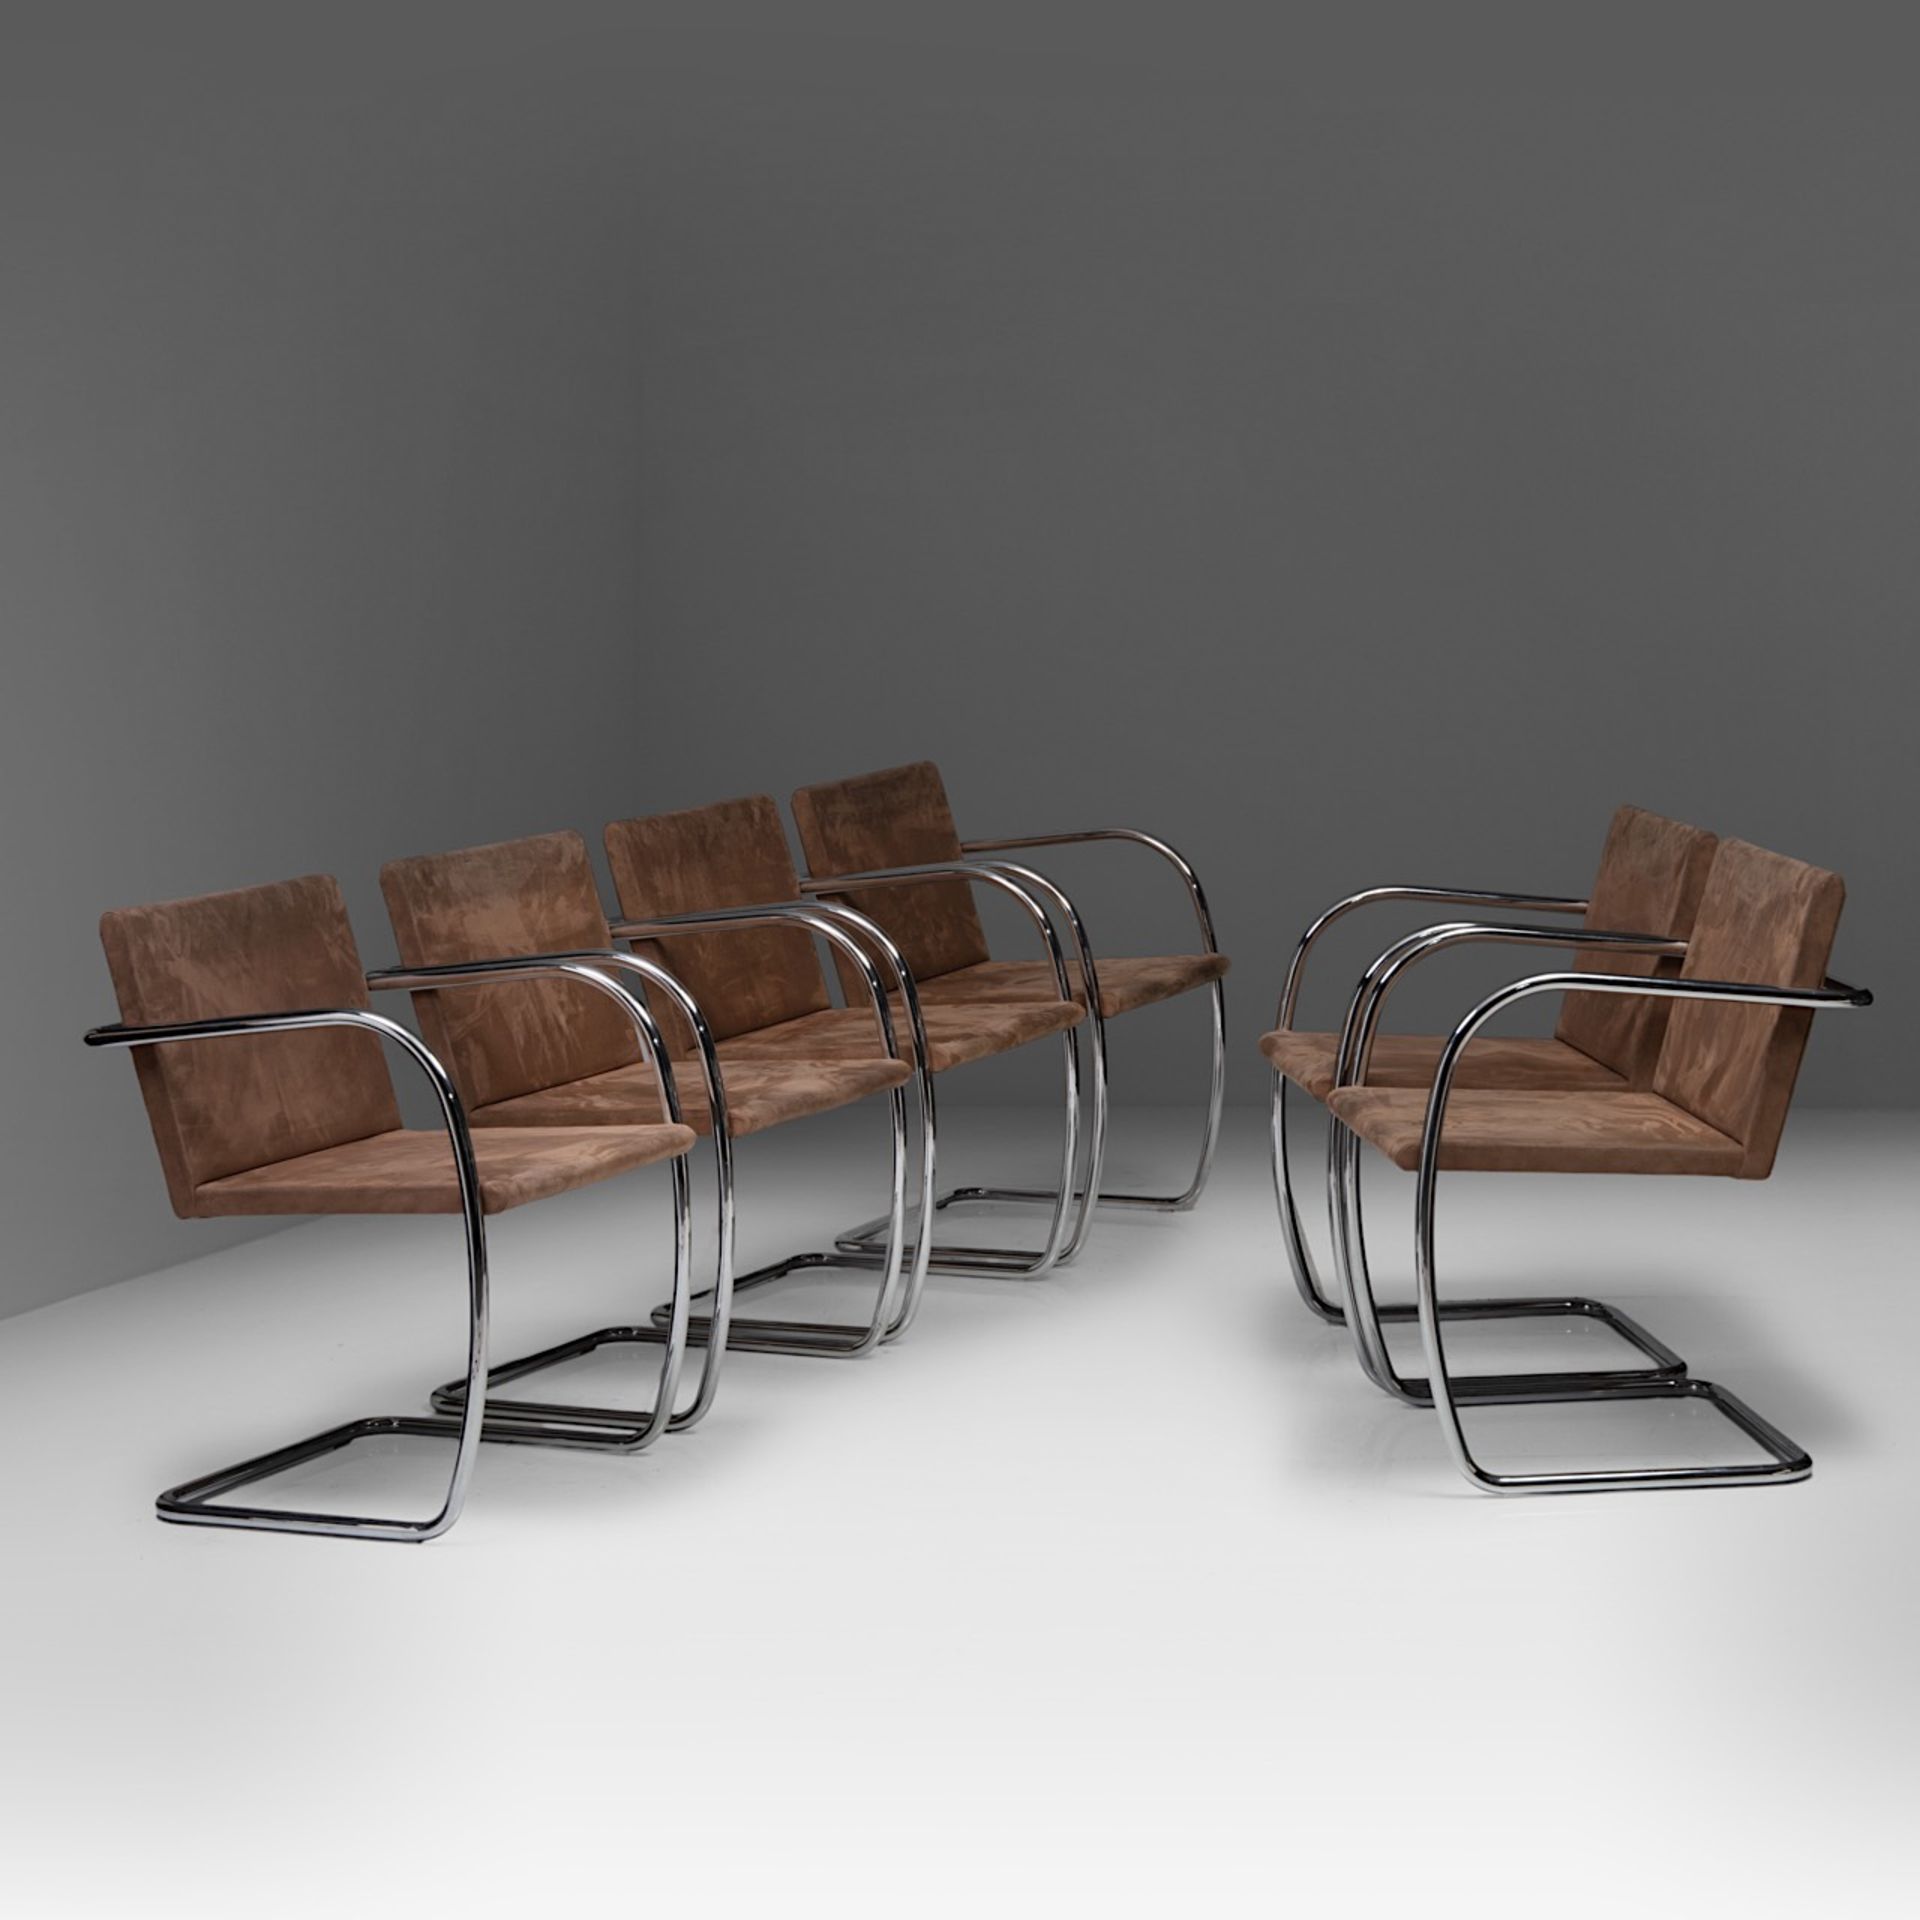 A set of 6 tubular Brno chairs by Ludwig Mies van der Rohe for Knoll, marked, H 78 - W 55 cm - Image 2 of 17